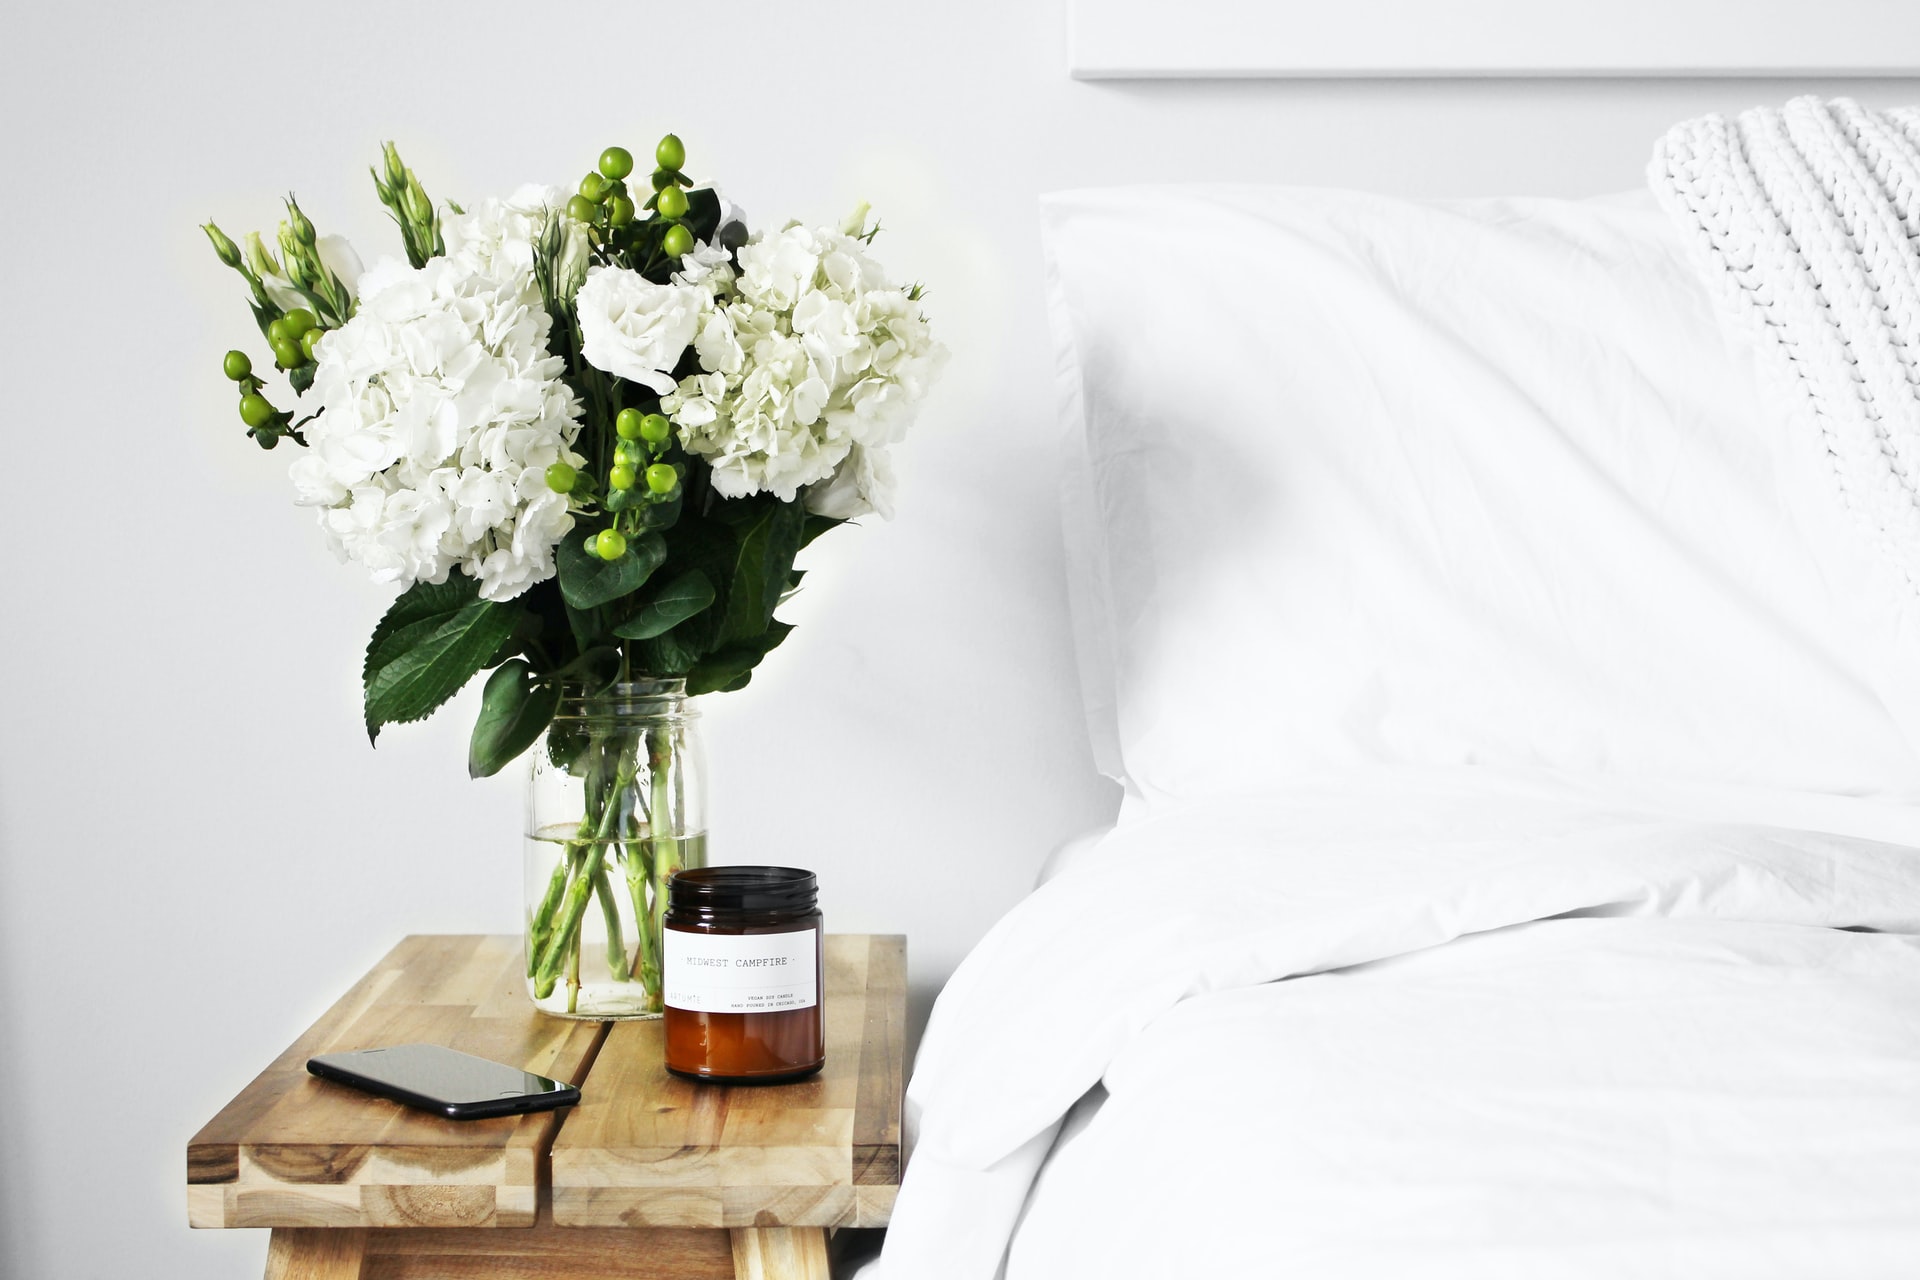 white bed with a wooden nightstand next to it containing a bouquet of white flowers, a candle and a cellphone